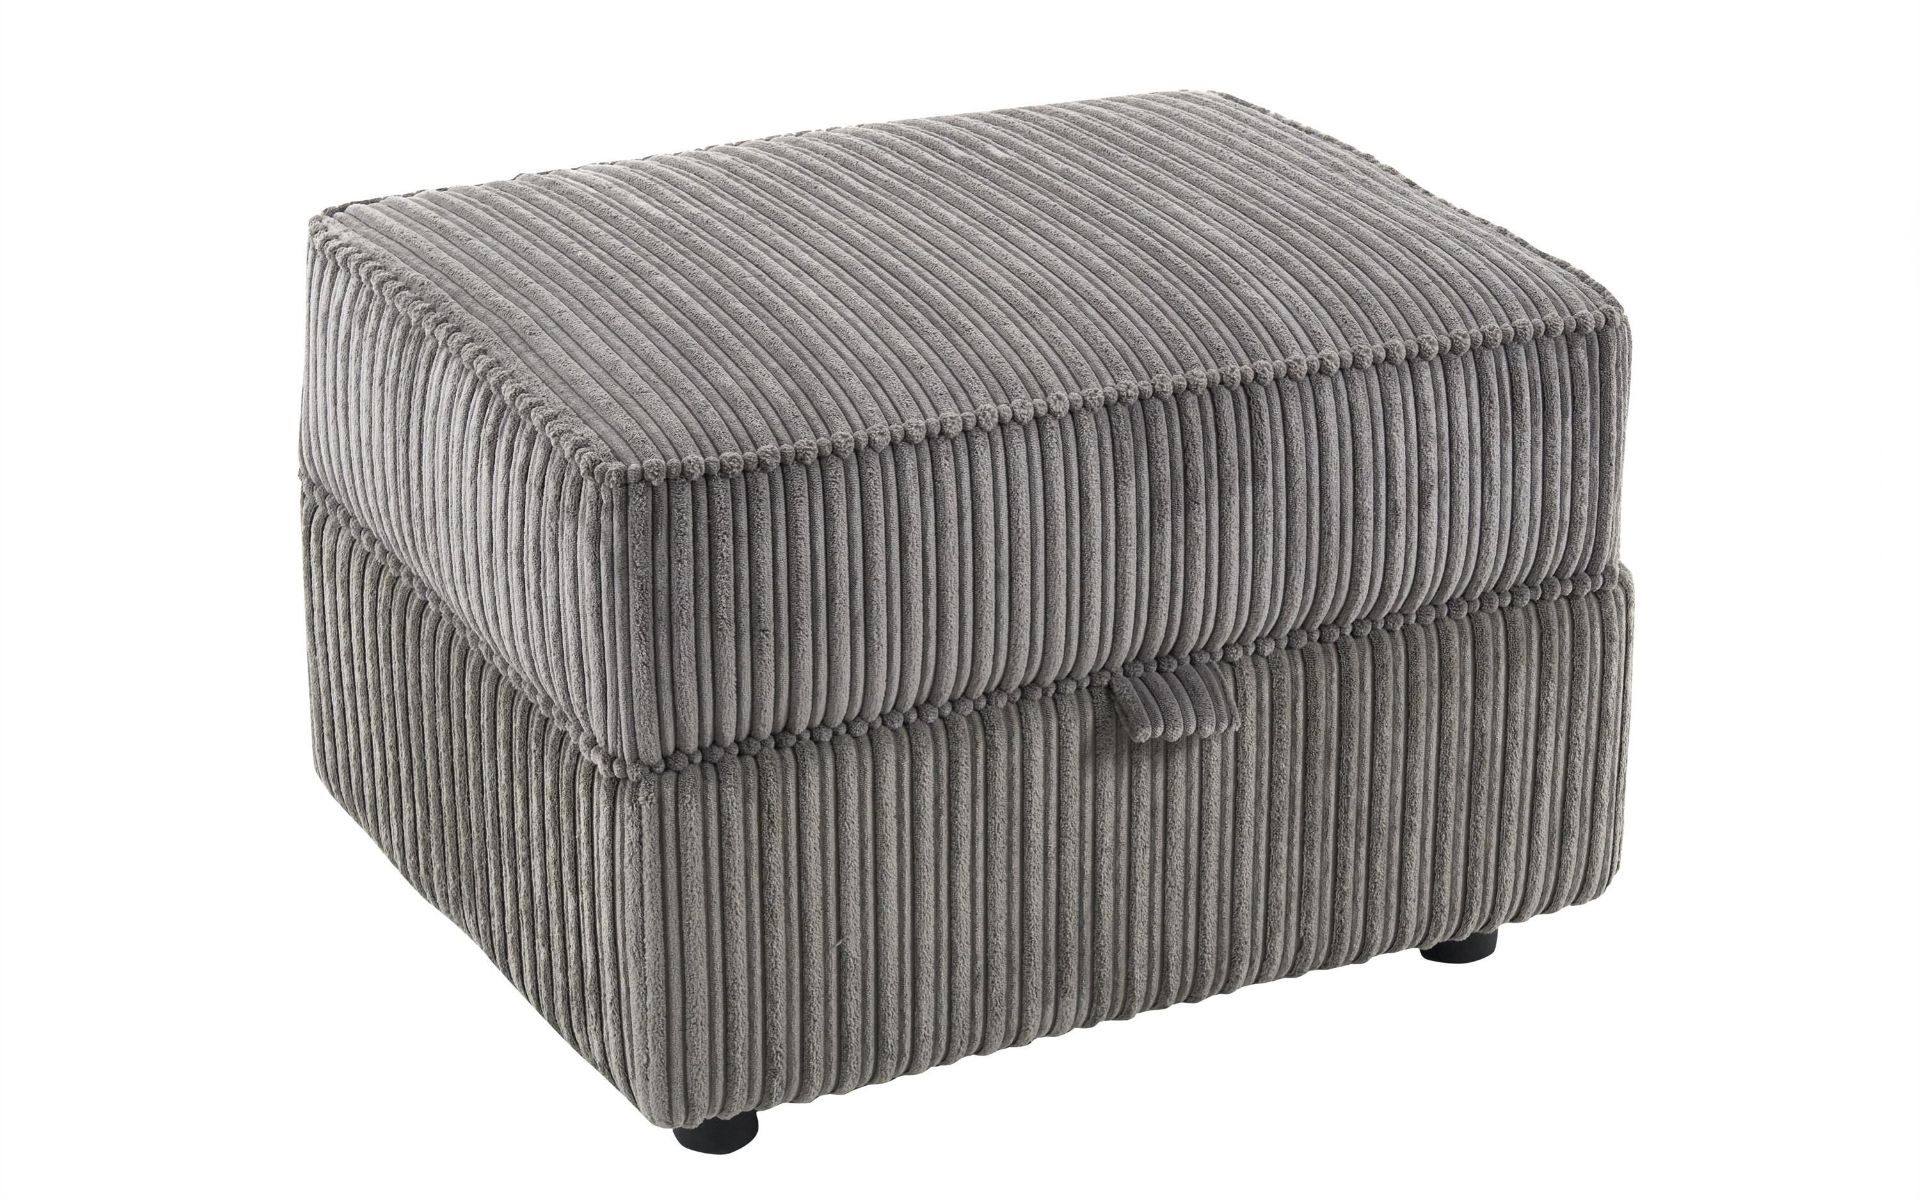 Gigi Storage Footstool Jumbo Cord Charcoal All Over Black Plastic Feet Acl RRP 330About the